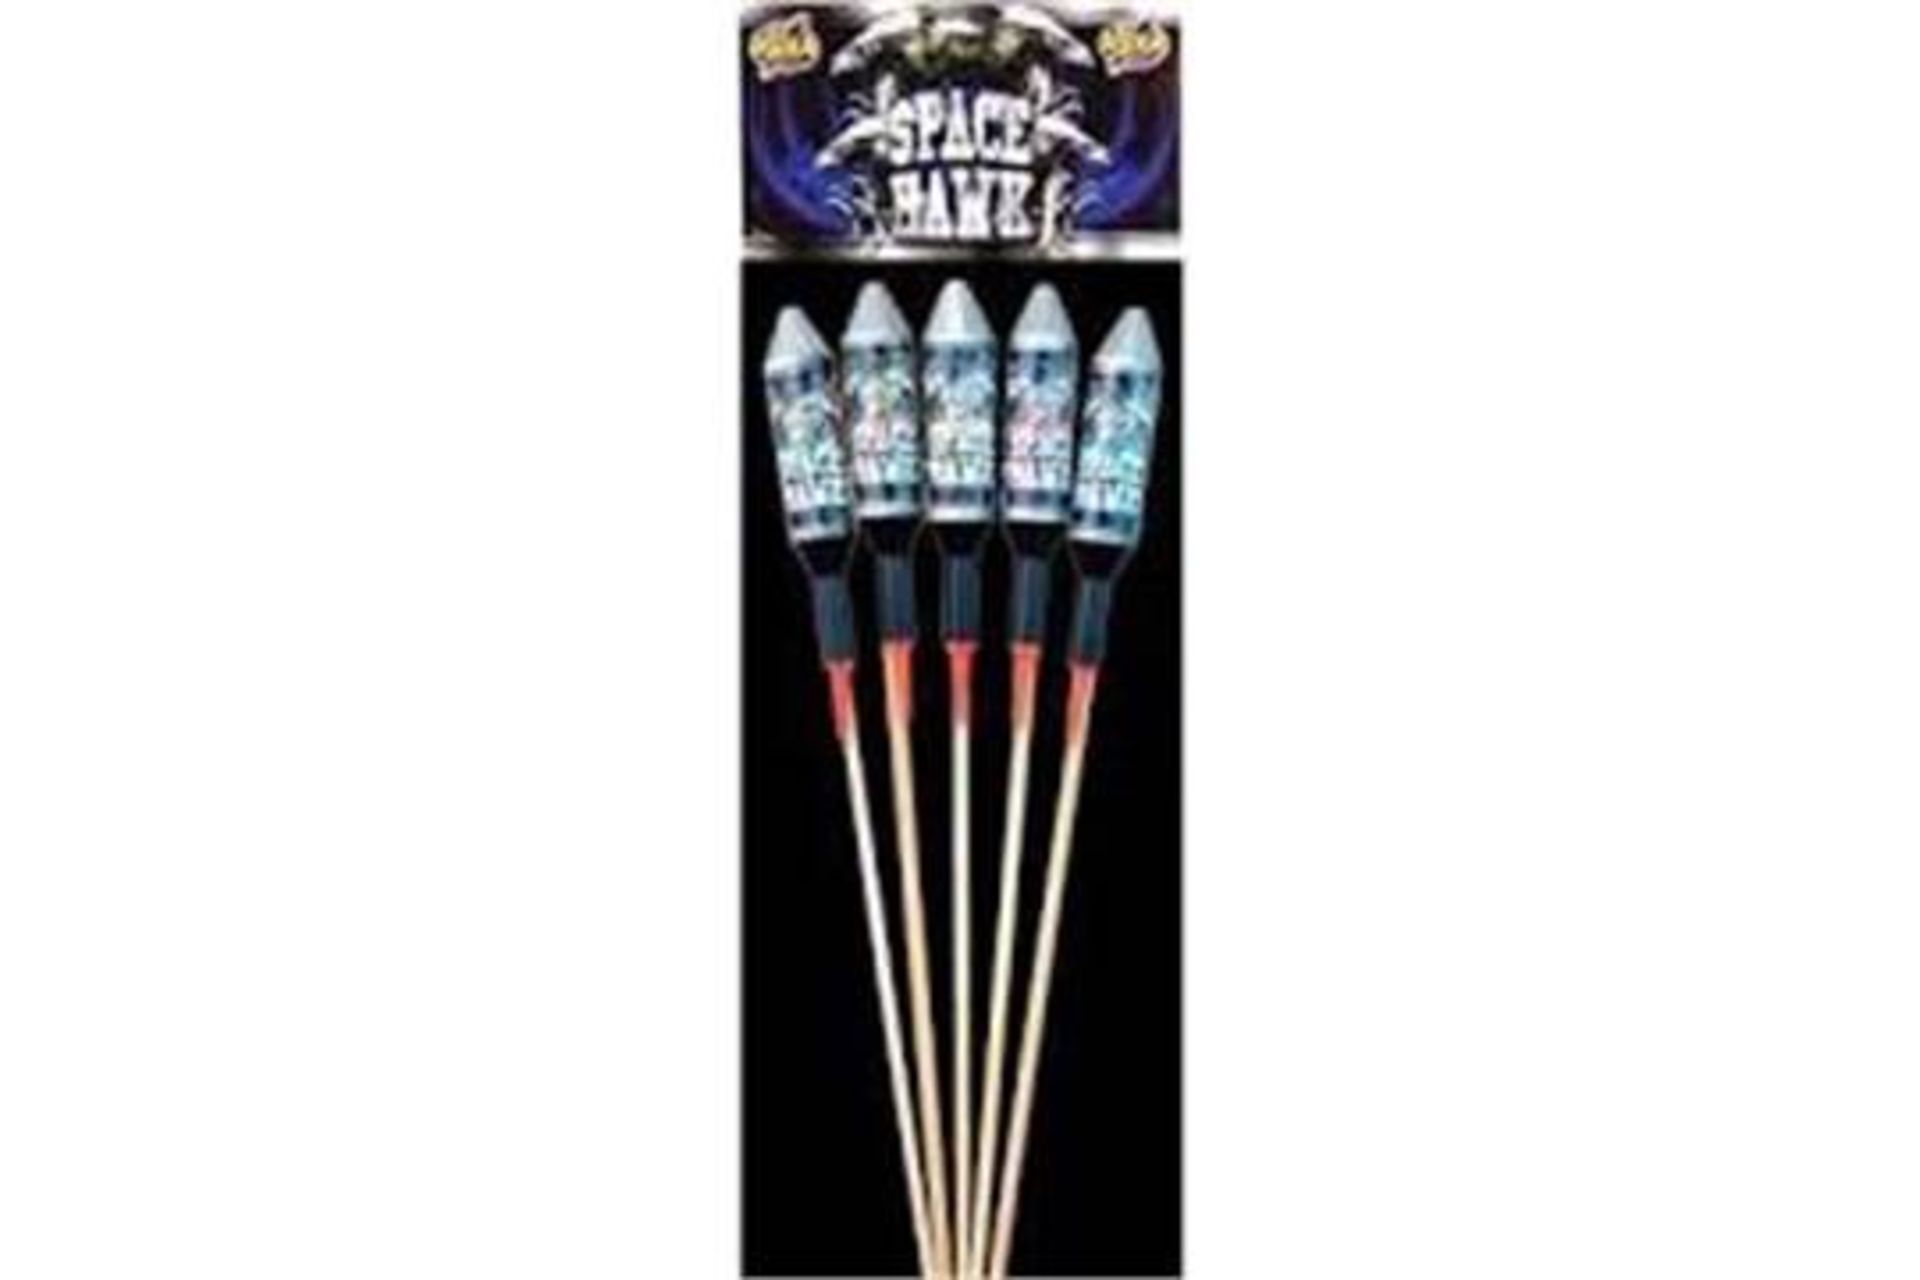 6 x Packs of 5 Space hawk rockets, High quality loud rockets. 'The best around' New and Sealed. £ - Image 2 of 2